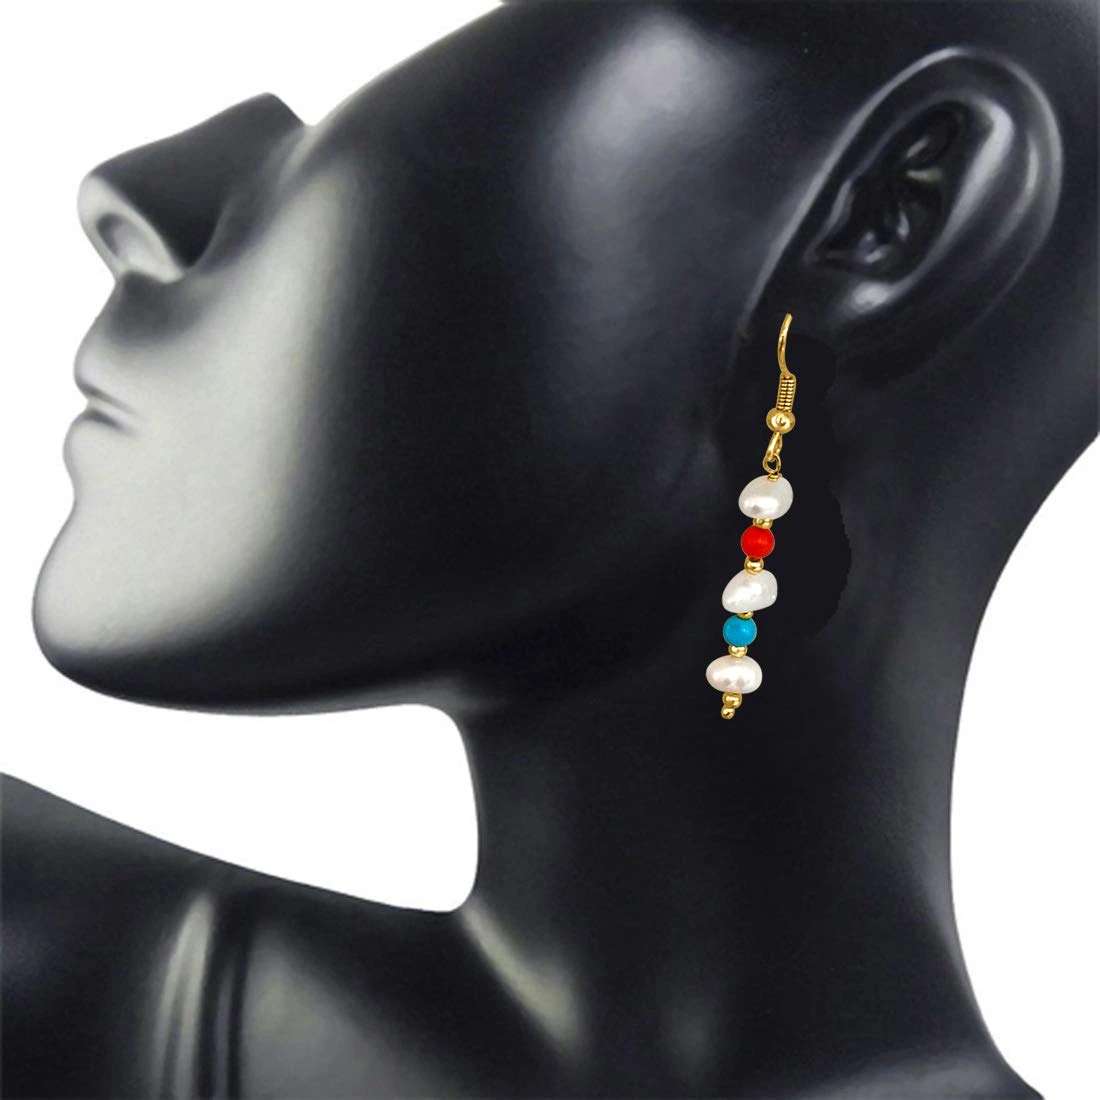 Real Coral, Turquoise & Freshwater Pearl Earring for Women (SE205)